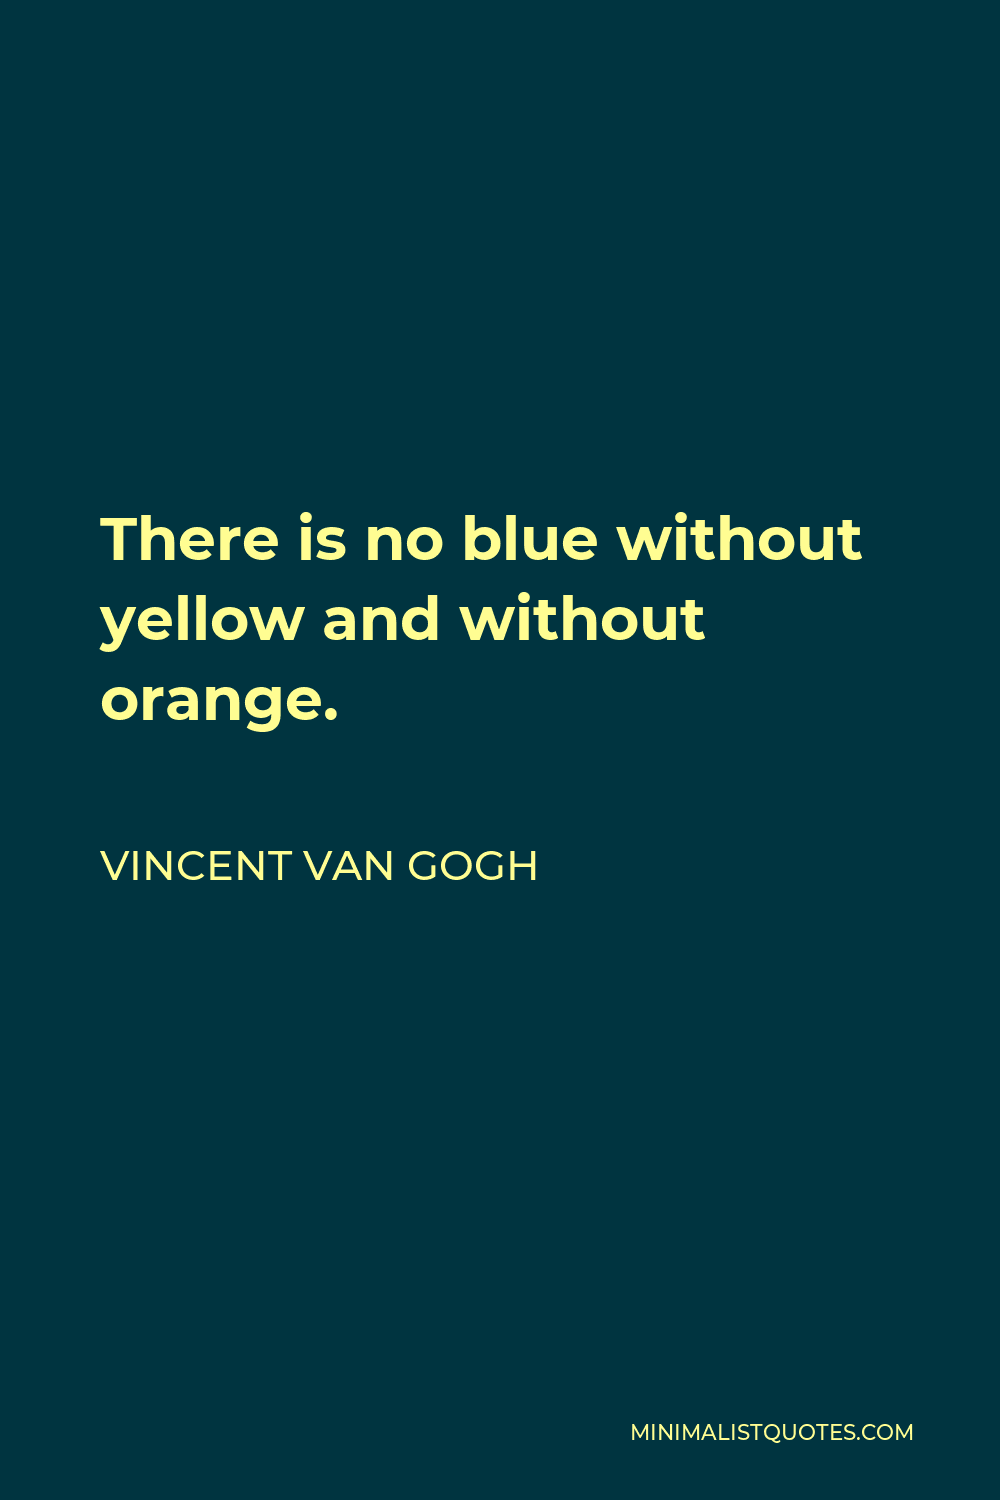 Vincent Van Gogh Quote - There is no blue without yellow and without orange.